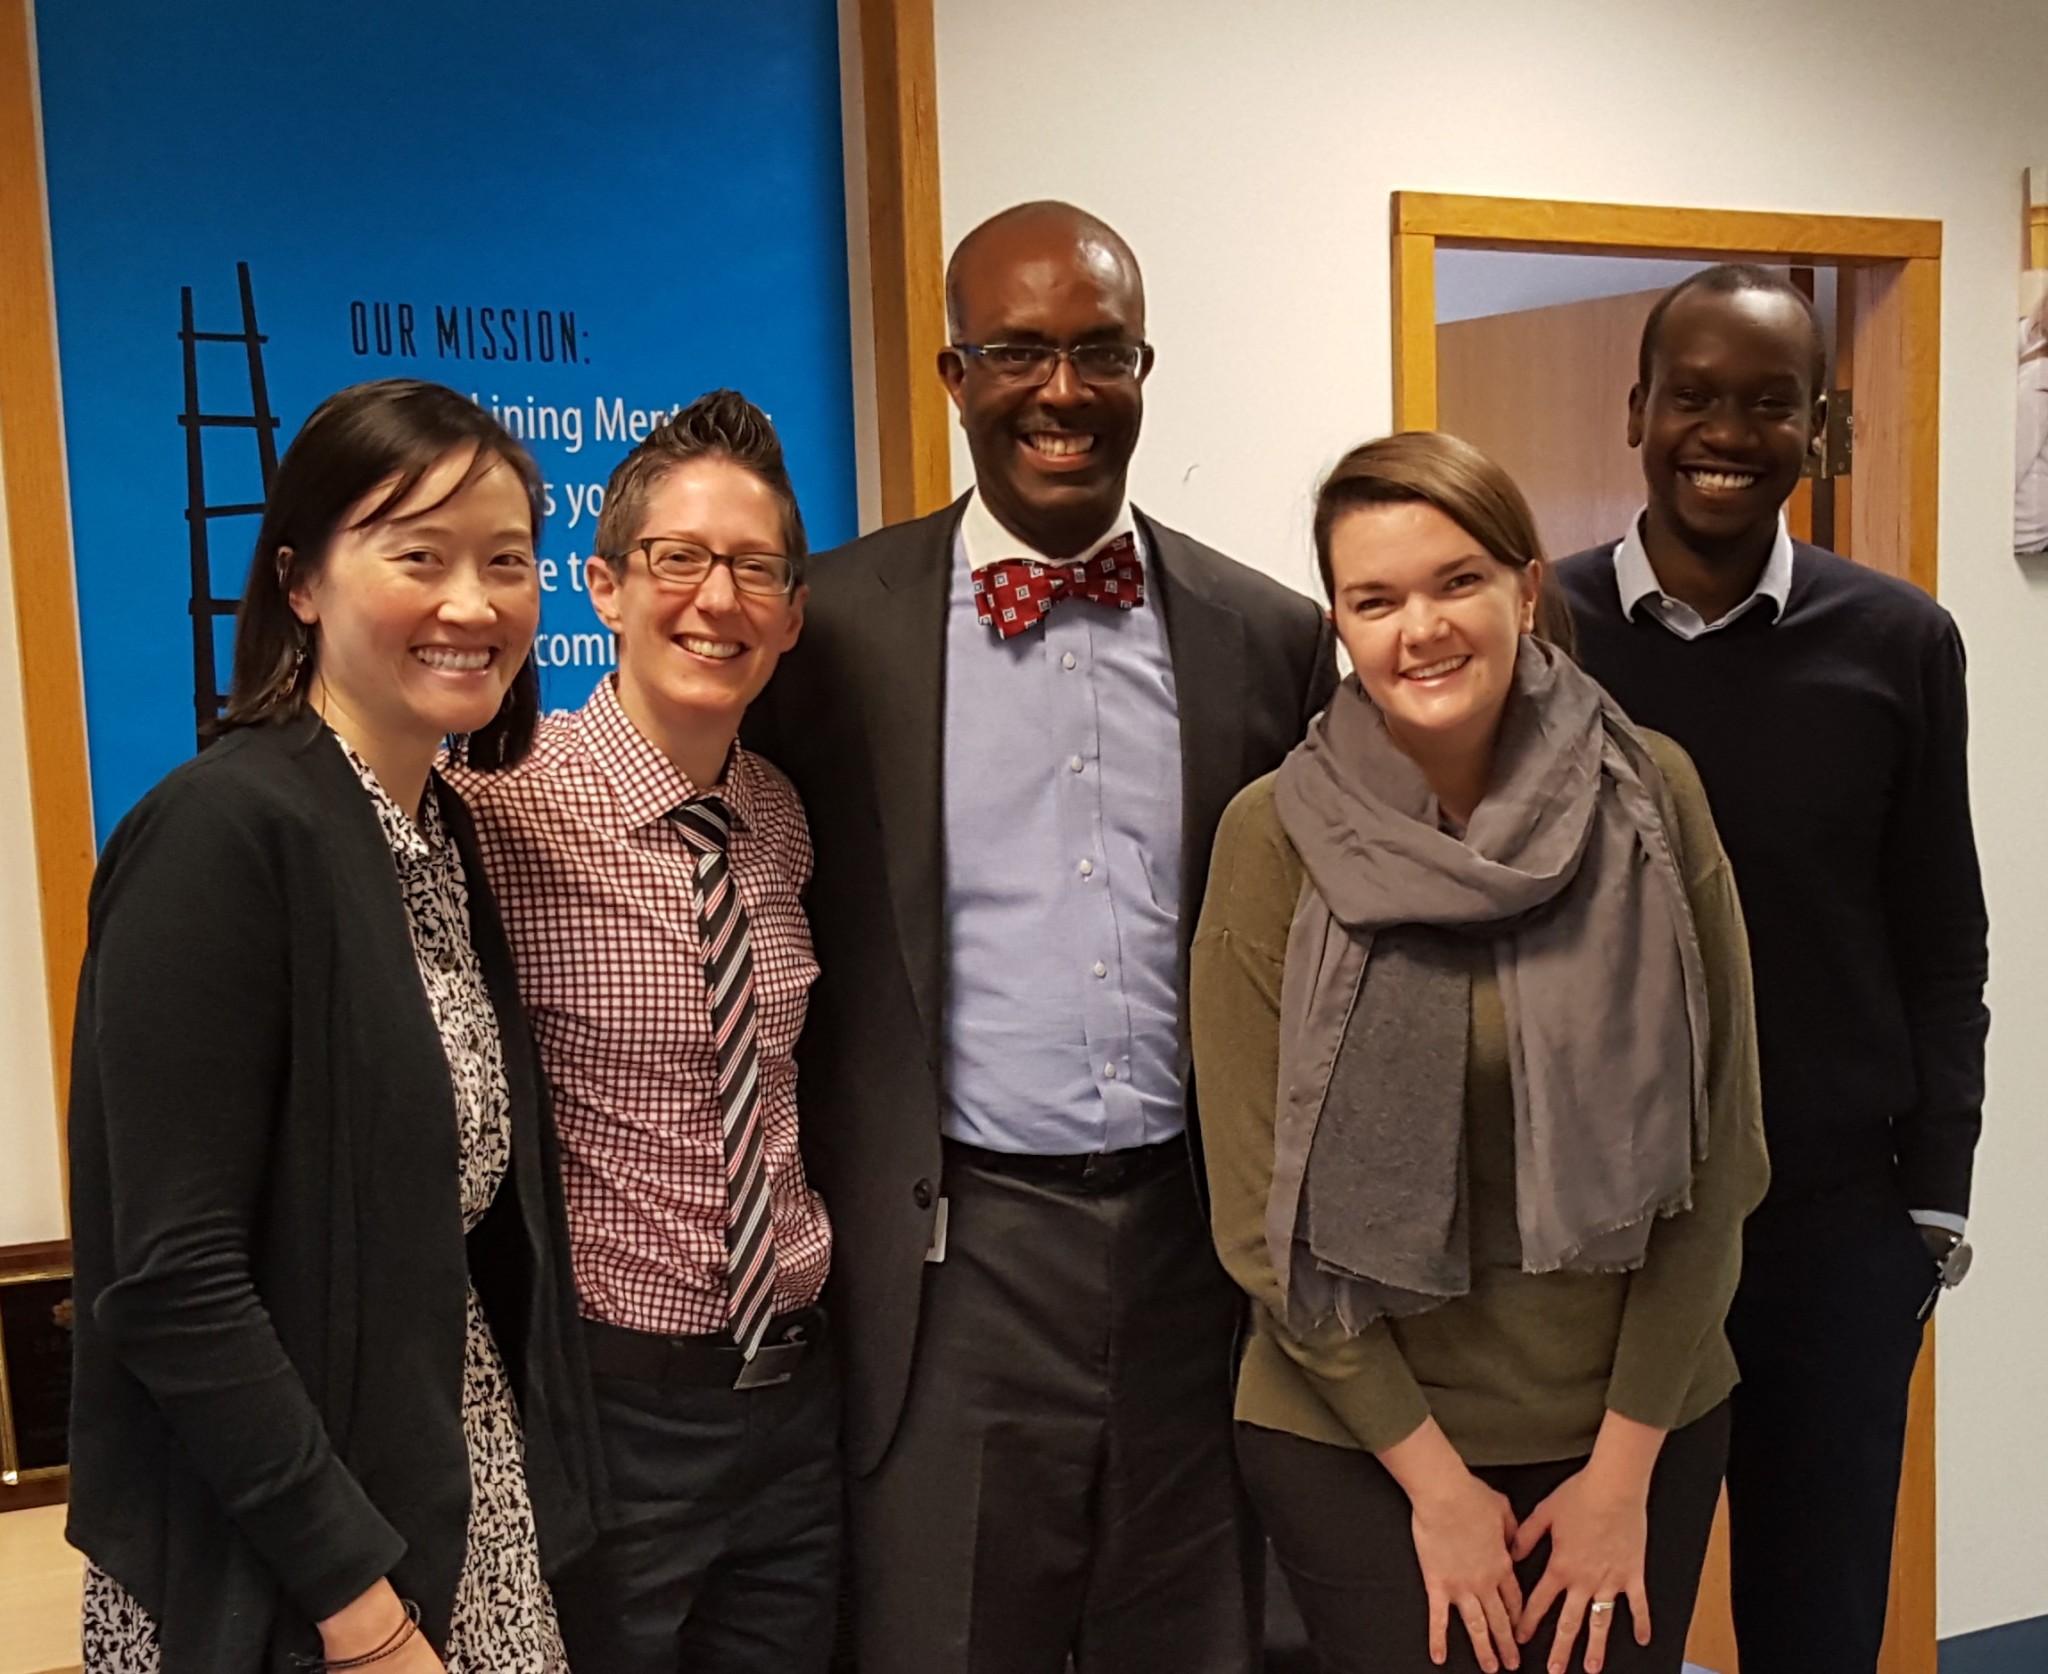 Roy Bates (center) with Silver Lining Mentoring Staff: Director of Evaluation and Strategy Melissa Birke Chu,CEO Colby Swettberg, Director of Programs Alaina Rosenberry, and Outreach Coordinator Brian Diah